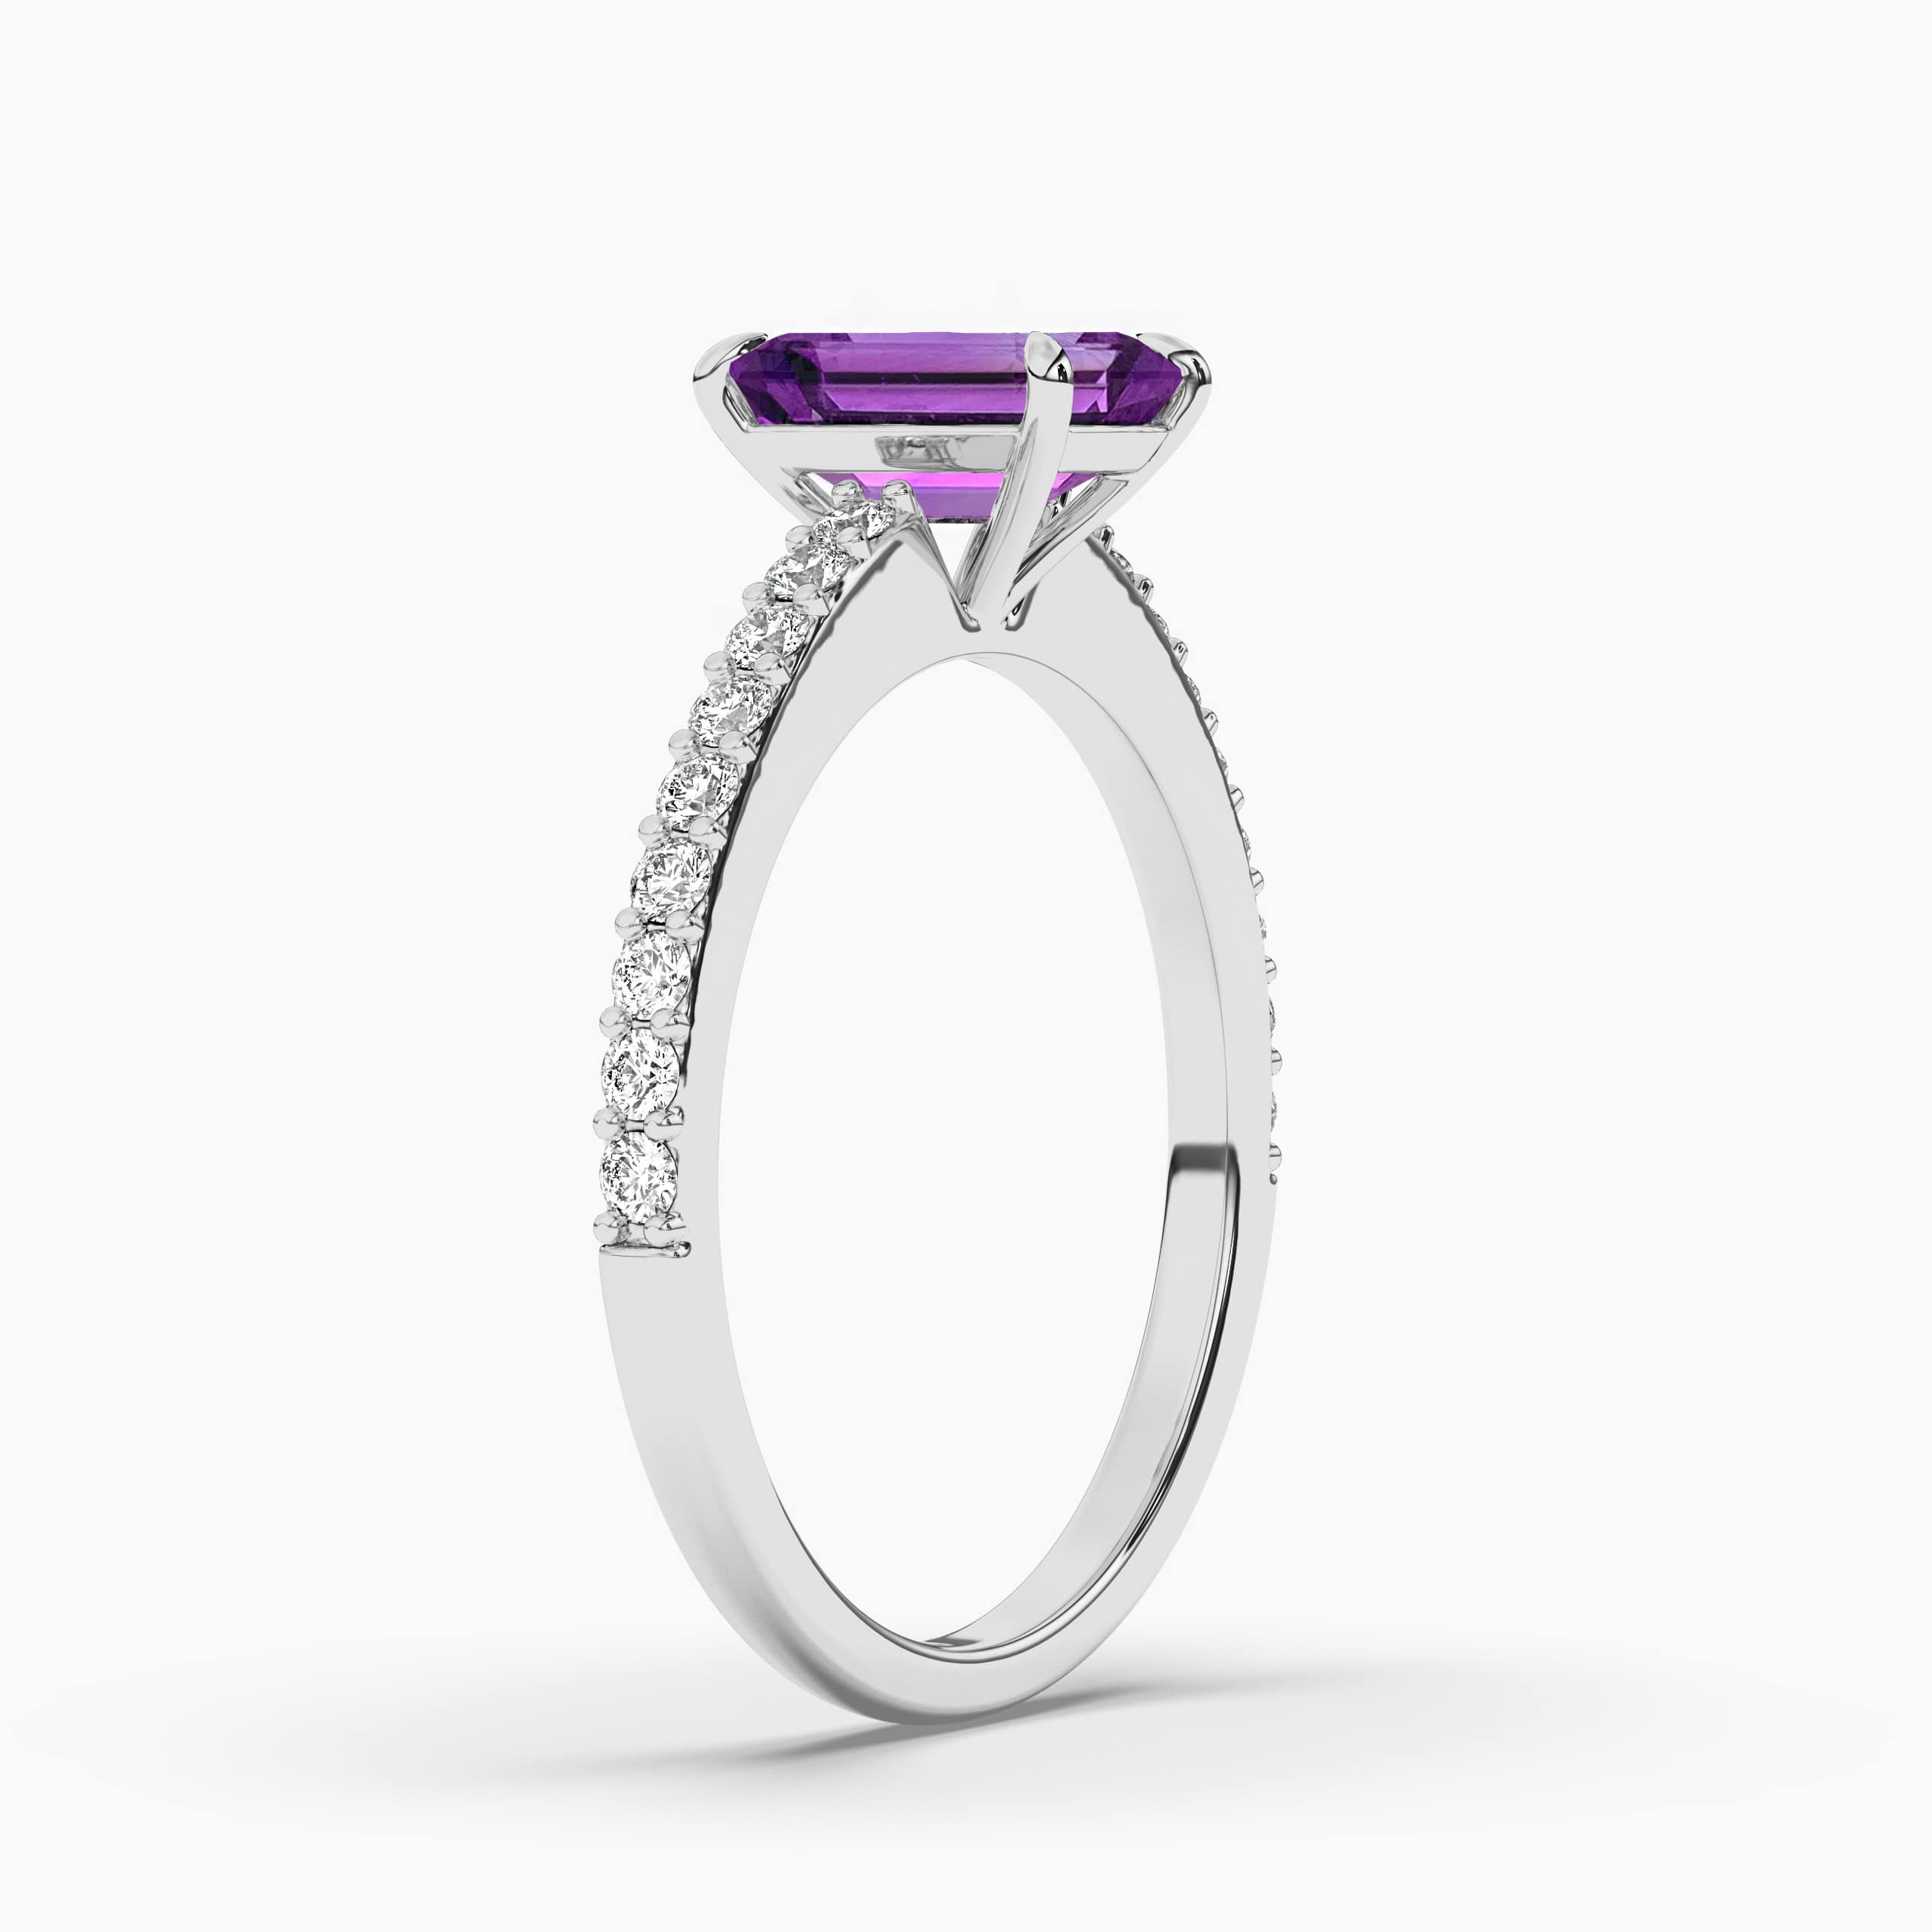 Emerald Cut Amethyst Engagement Ring, White Gold